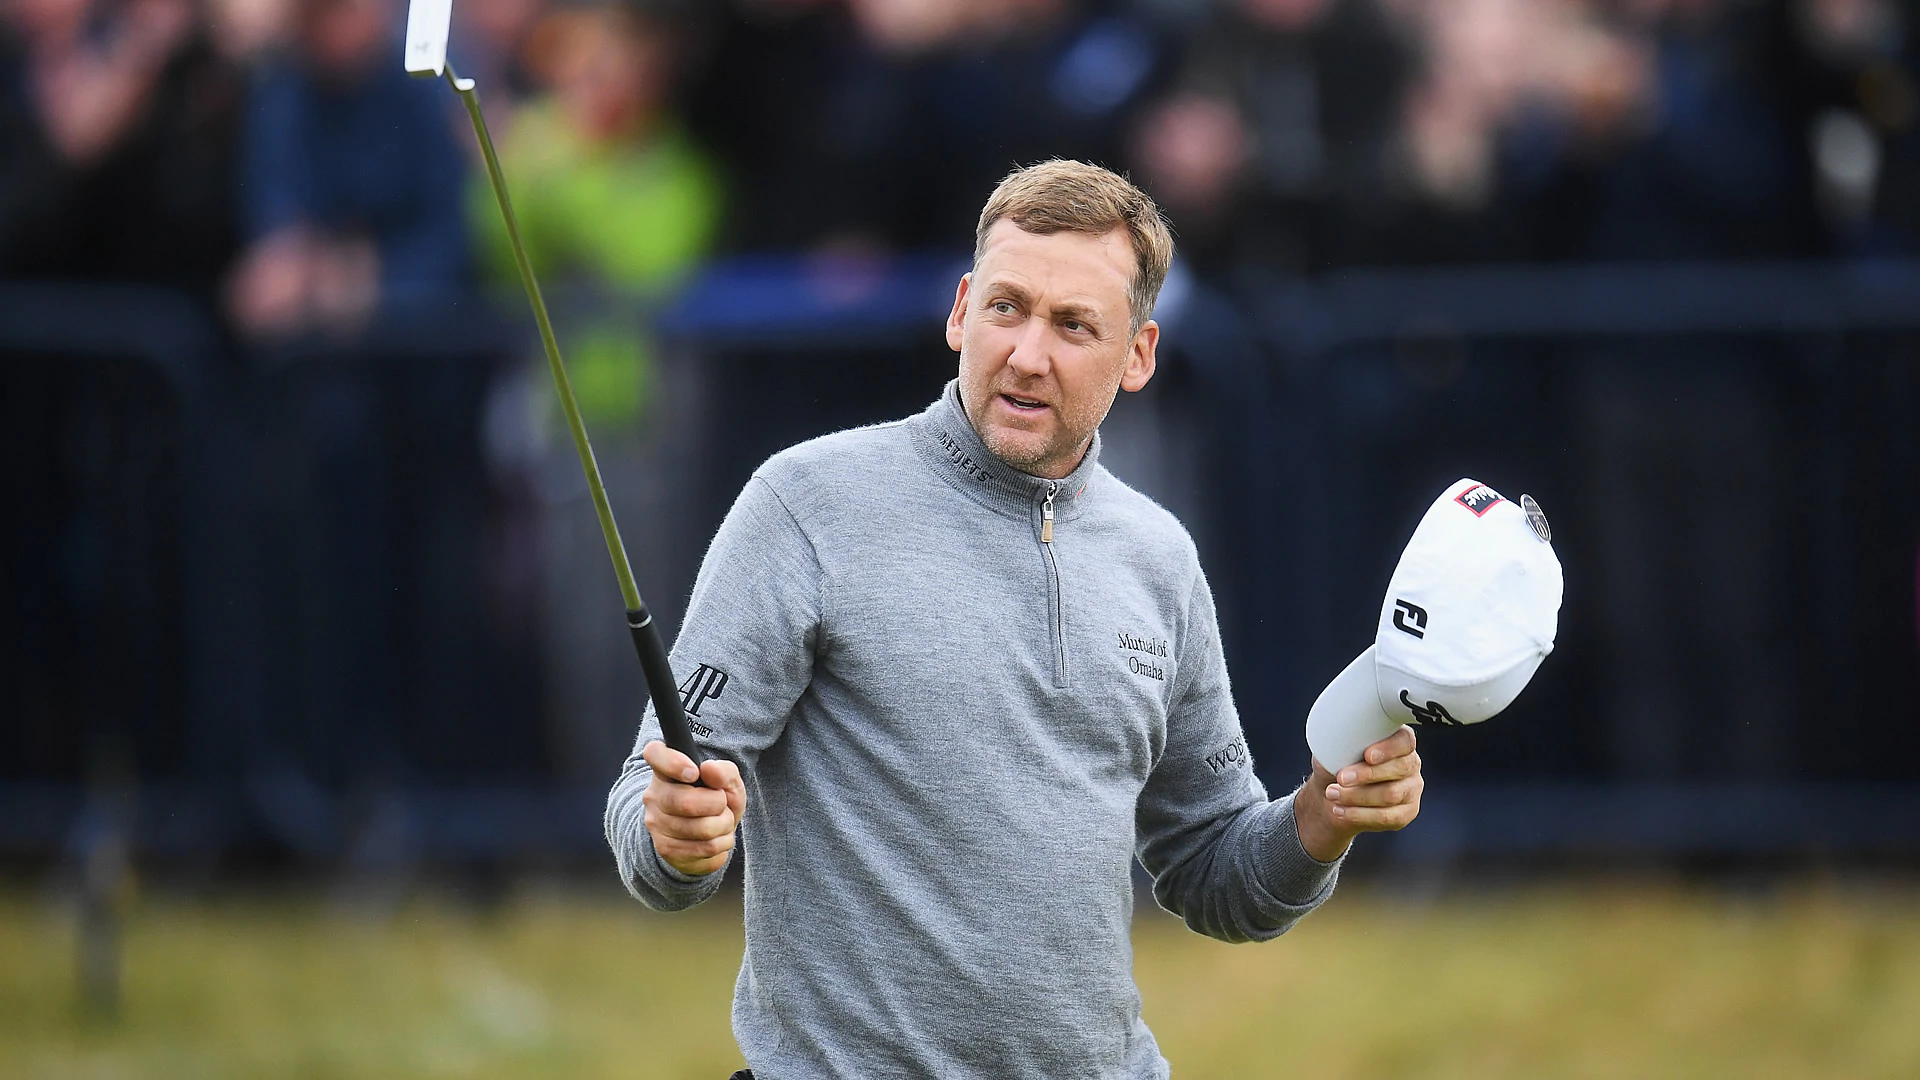 Poulter ready to go 'toe-to-toe with anyone this weekend'